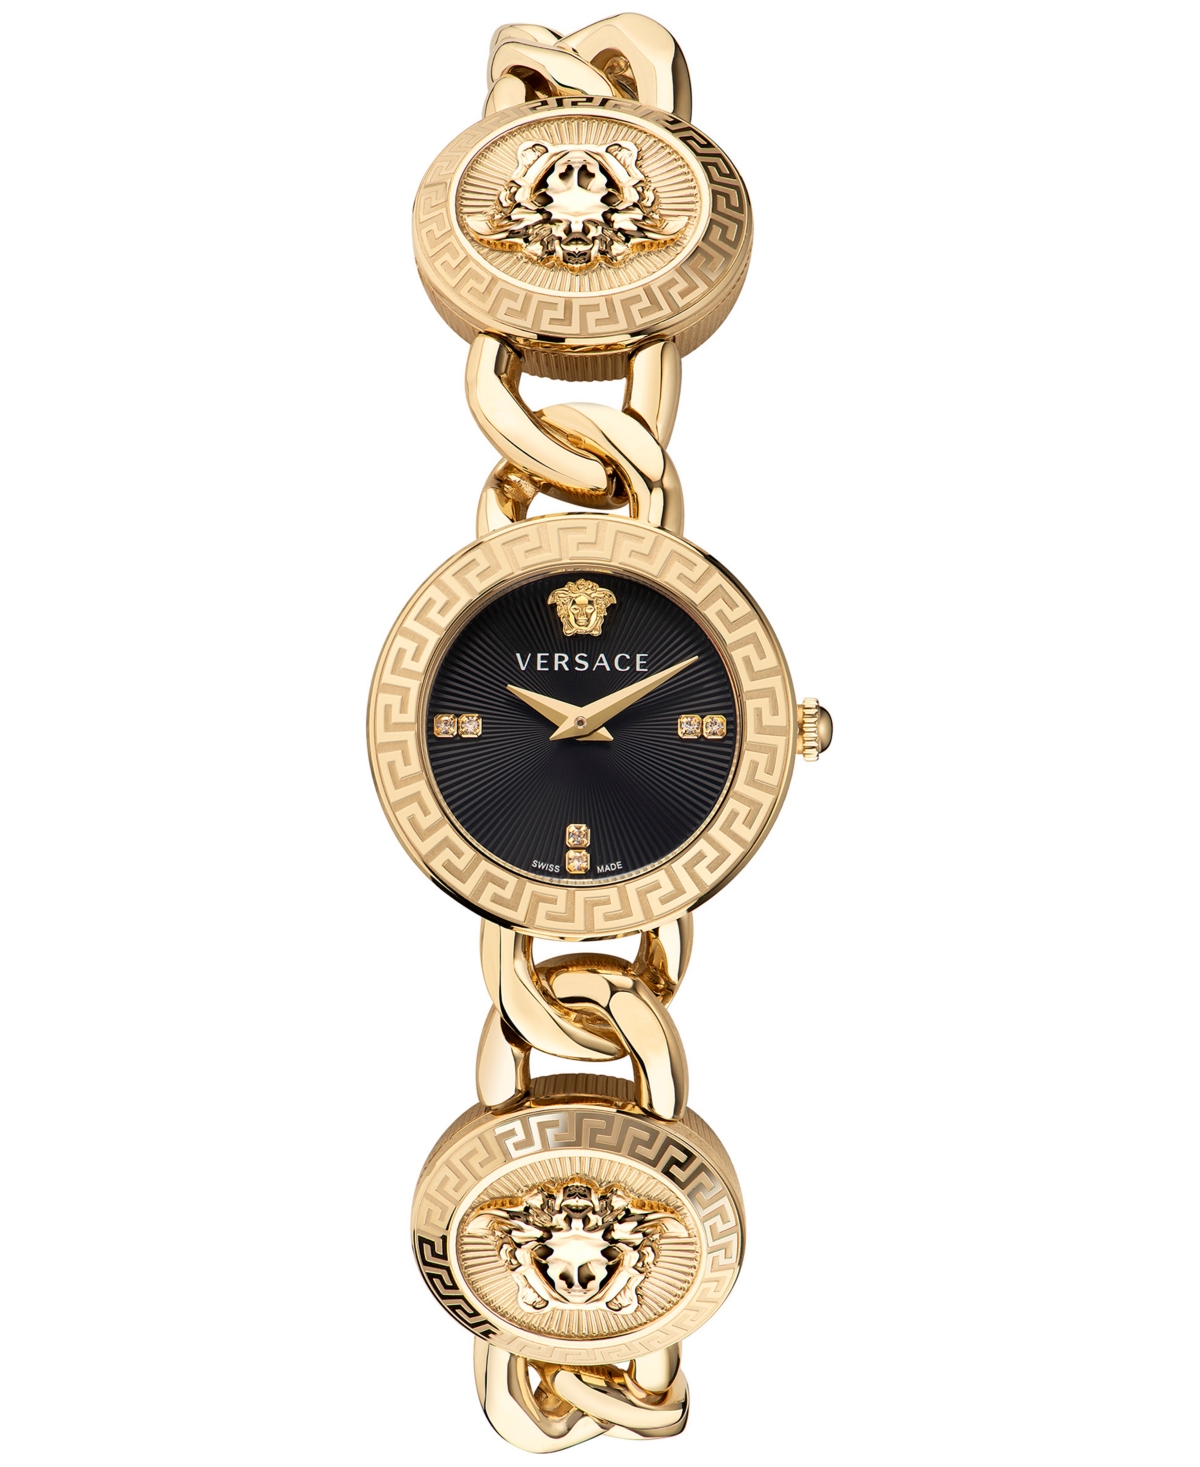 VERSACE WOMEN'S STUD ICON GOLD ION PLATED BRACELET WATCH 26MM